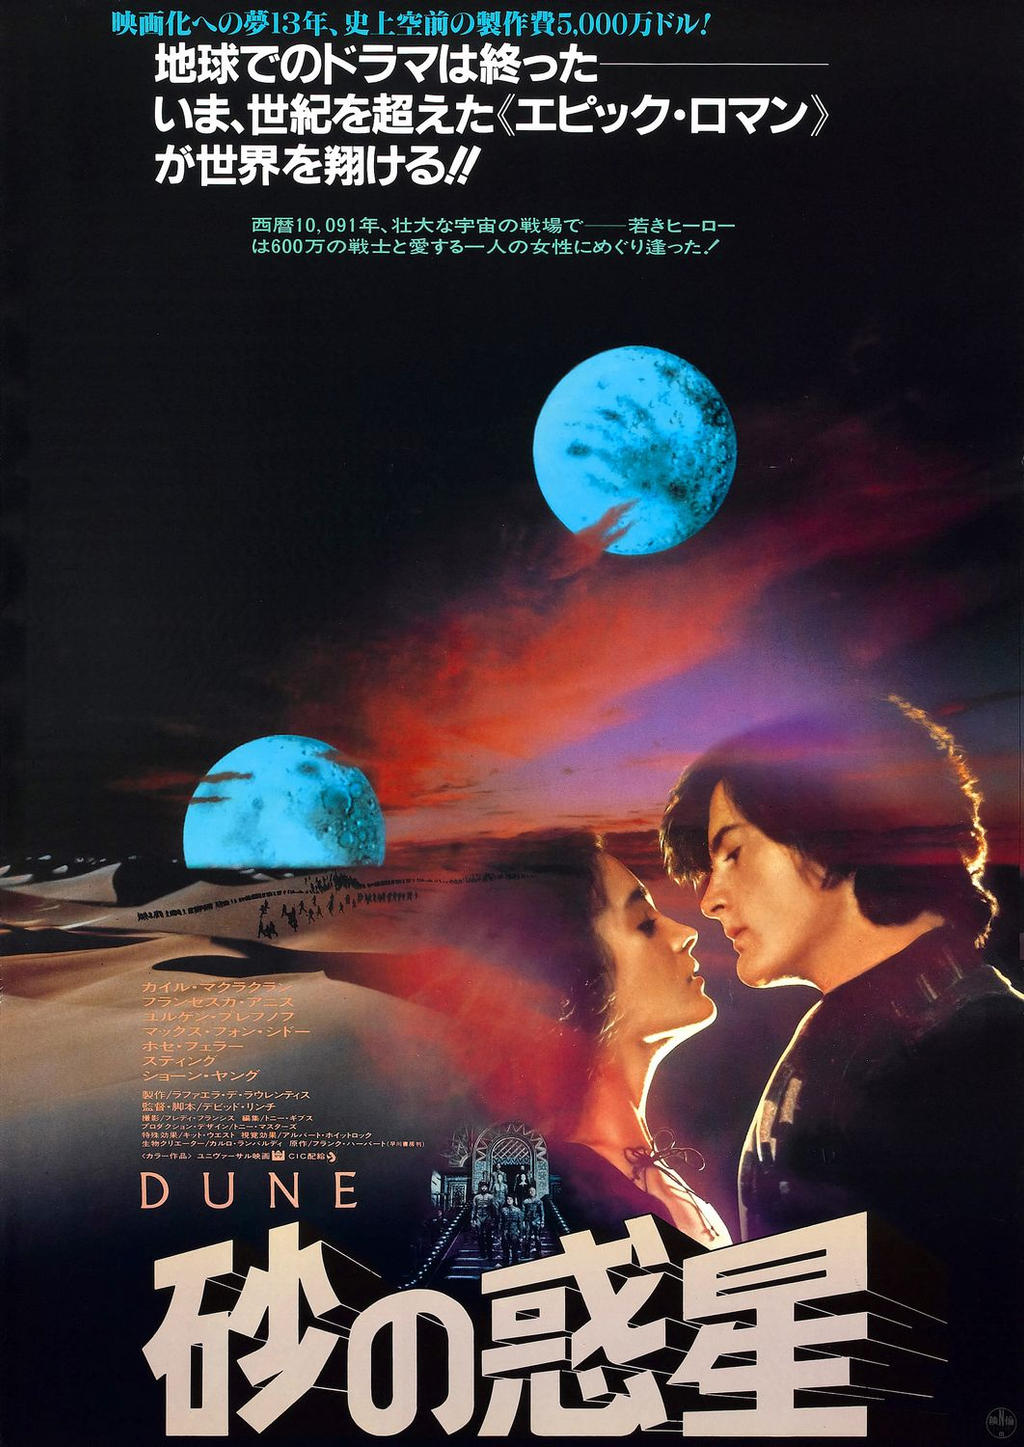 Dune Movie Poster 2 (Japanese Version) by ChaosEmperor971 on DeviantArt